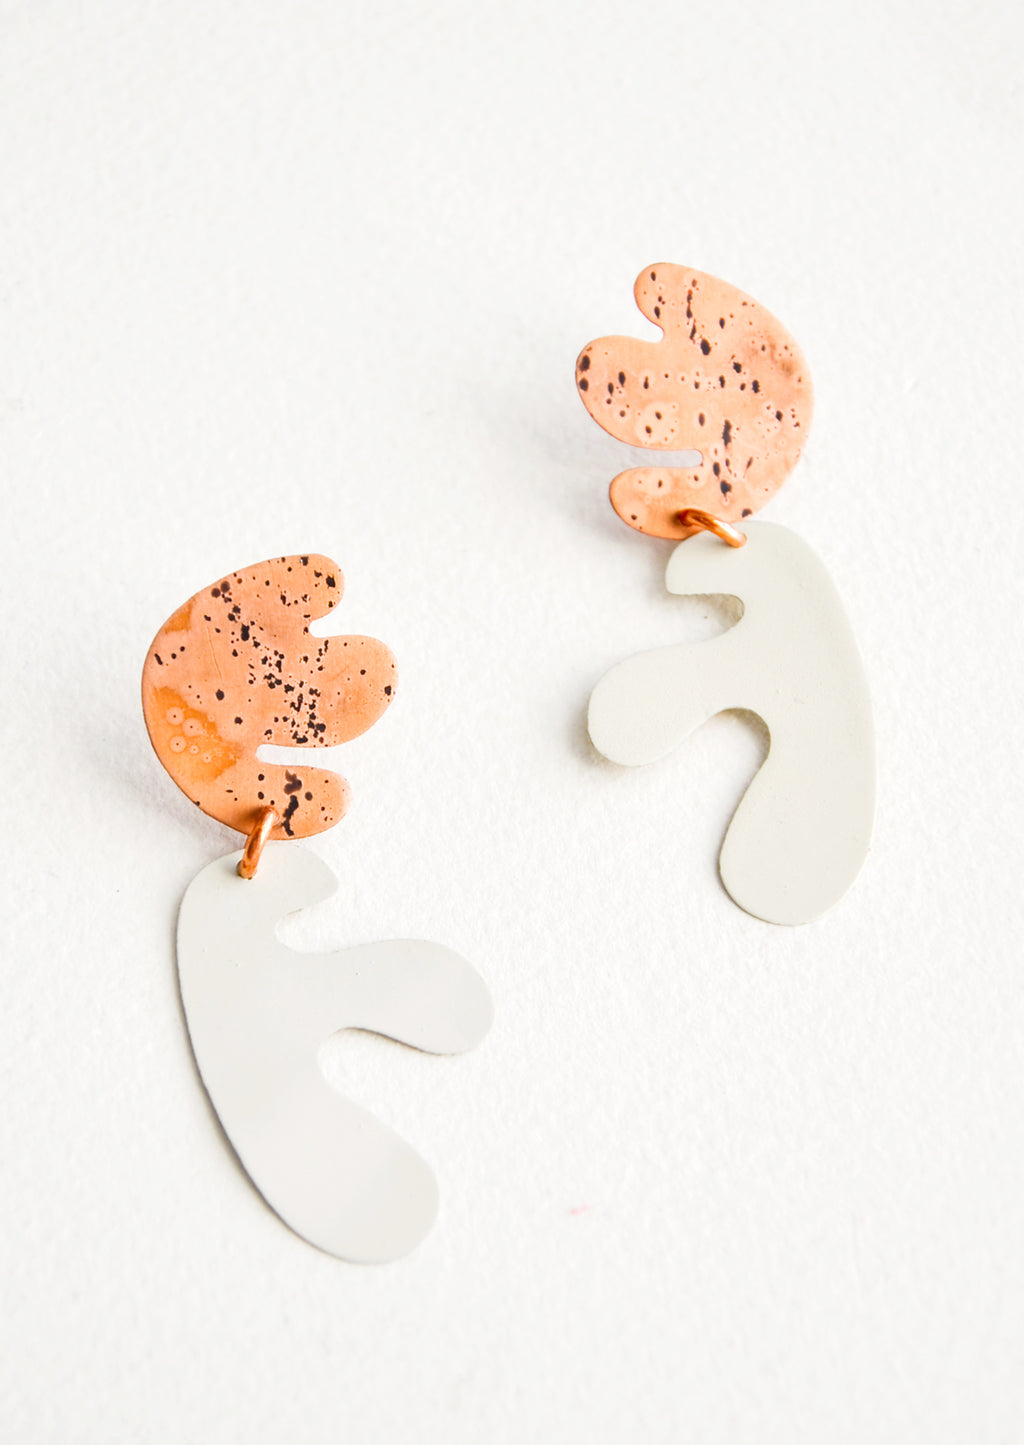 Cream / Spotted Copper: Seaweed Cut Out Earrings in Cream / Spotted Copper - LEIF